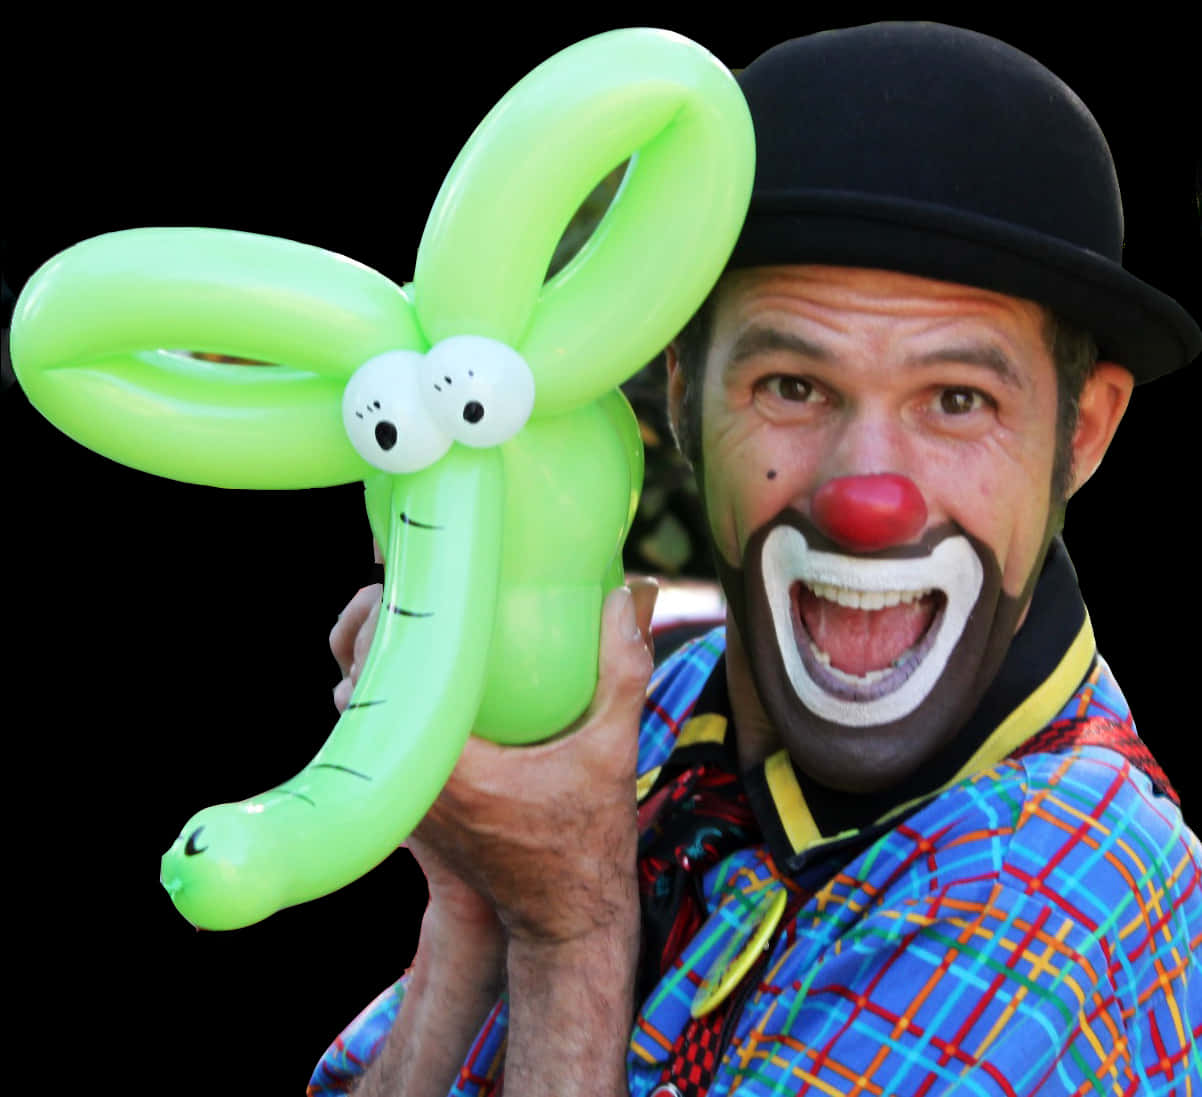 A Man With A Clown Face And Balloon Elephant